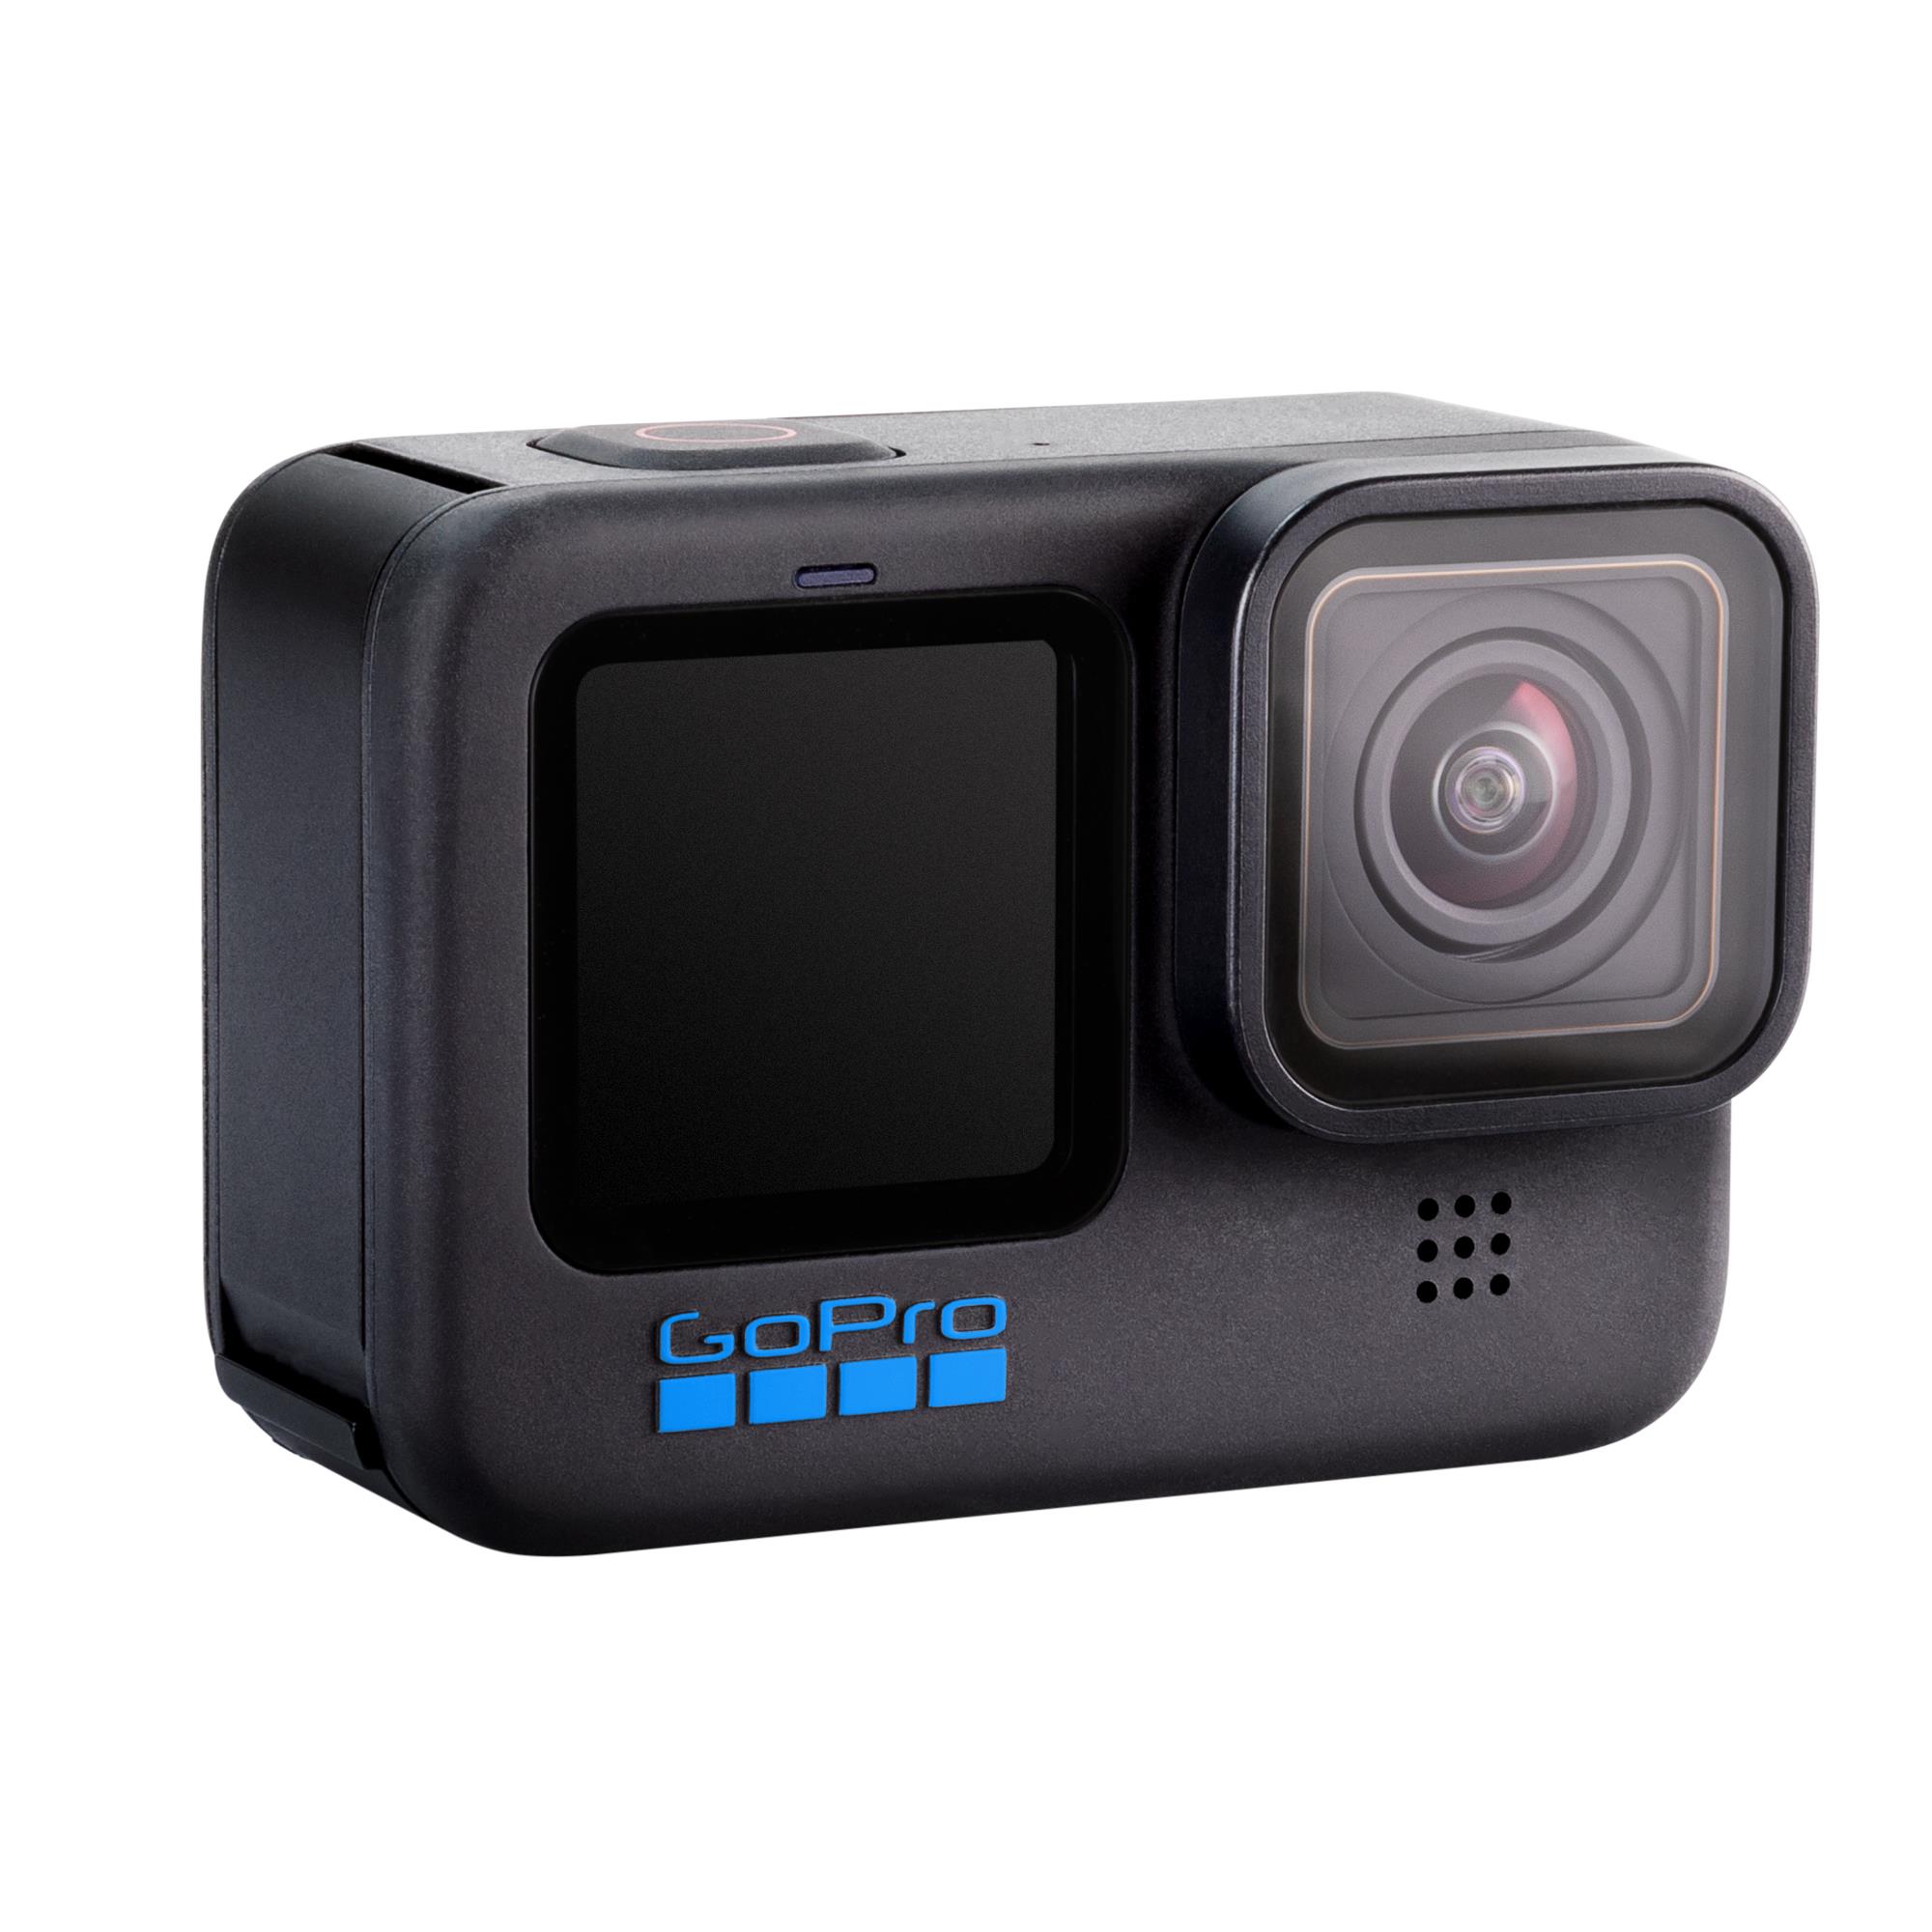 SSE GoPro HERO10 (Hero 10) Black with Starter Accessory Bundle: 1x Replacement Batteries, Water Resistant Action Camera Case, Chest & Head Straps with Action Camera Mount & Much More - image 4 of 7